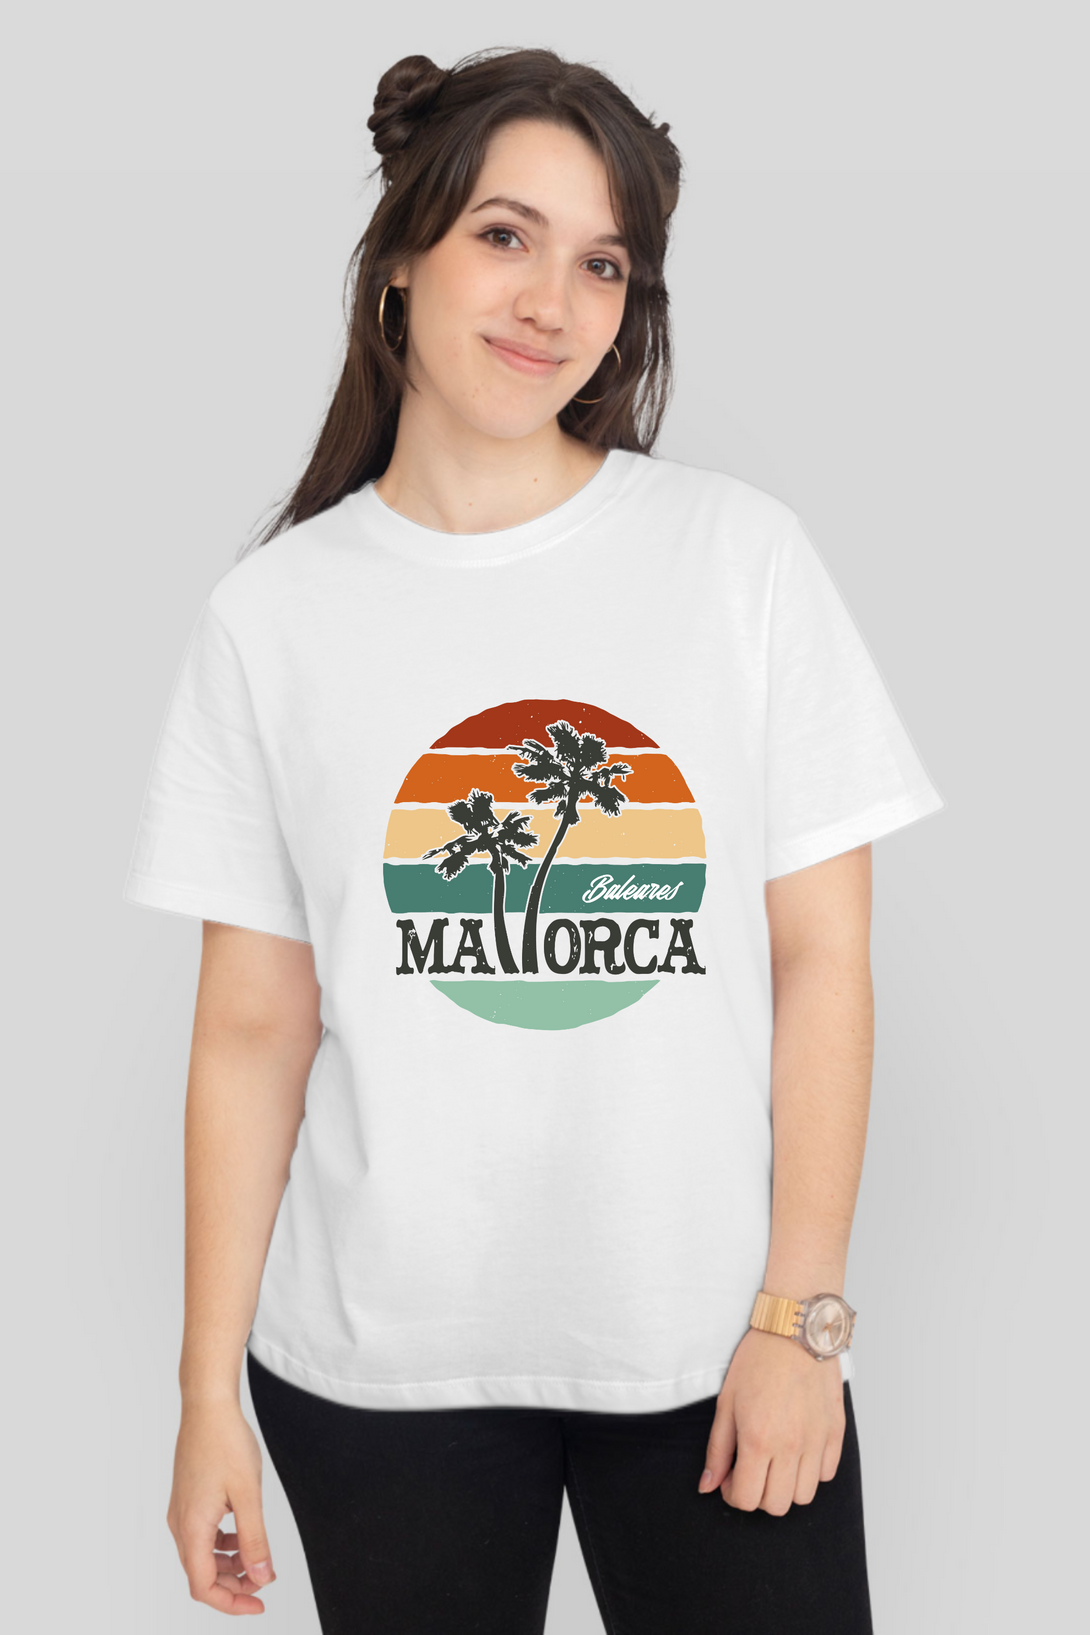 Mallorca And Palm Printed T-Shirt For Women - WowWaves - 7